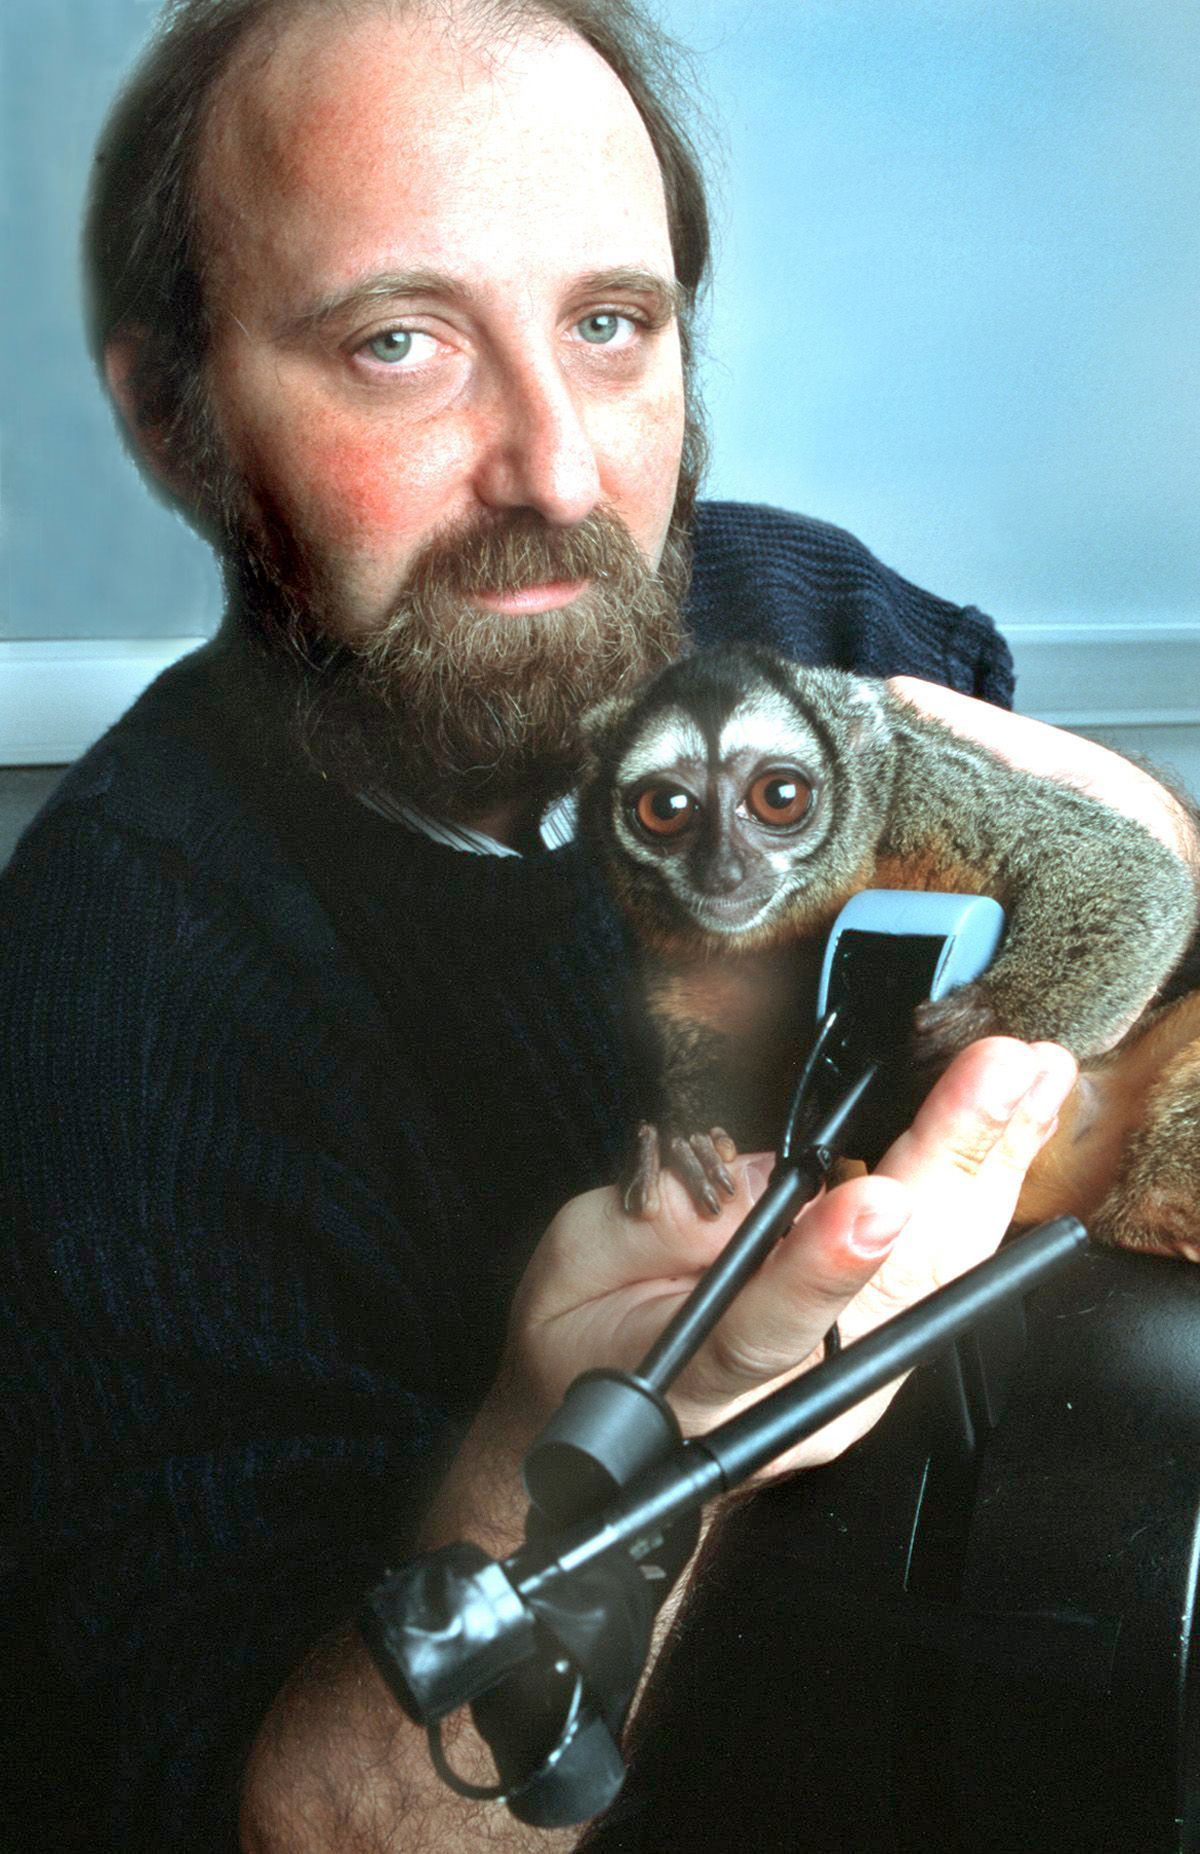 In 2000, Duke University researchers trained an owl monkey to use its mind to control a robotic arm, using a device implanted into the motor cortex of its brain. "This was only the beginning of a promising journey," wrote lead scientist Miguel Nicolelis, shown with another owl monkey. The Washington Post photos (The Washington Post photos / The Spokesman-Review)